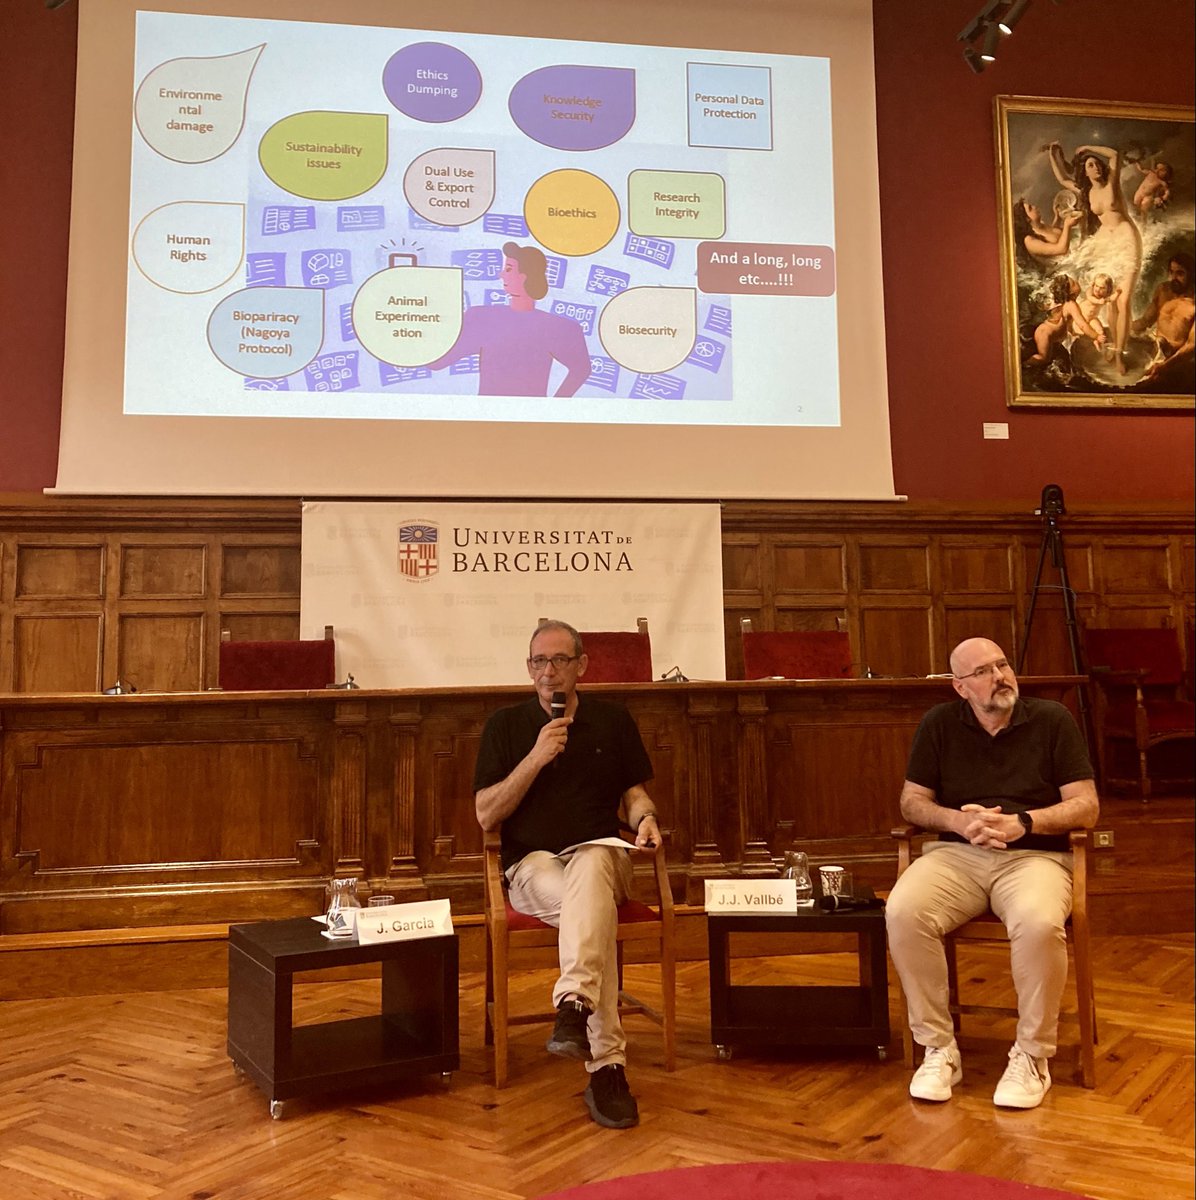 Very useful presentations today at @UniBarcelona regarding how @LERUnews universities’ are tackling new challenges affecting research #dualuse #foreigninterference Interesting discussions also for @charm_eu @CoimbraGroup Many thanks to @jordigarciafdez @ignasi @pepvallbe